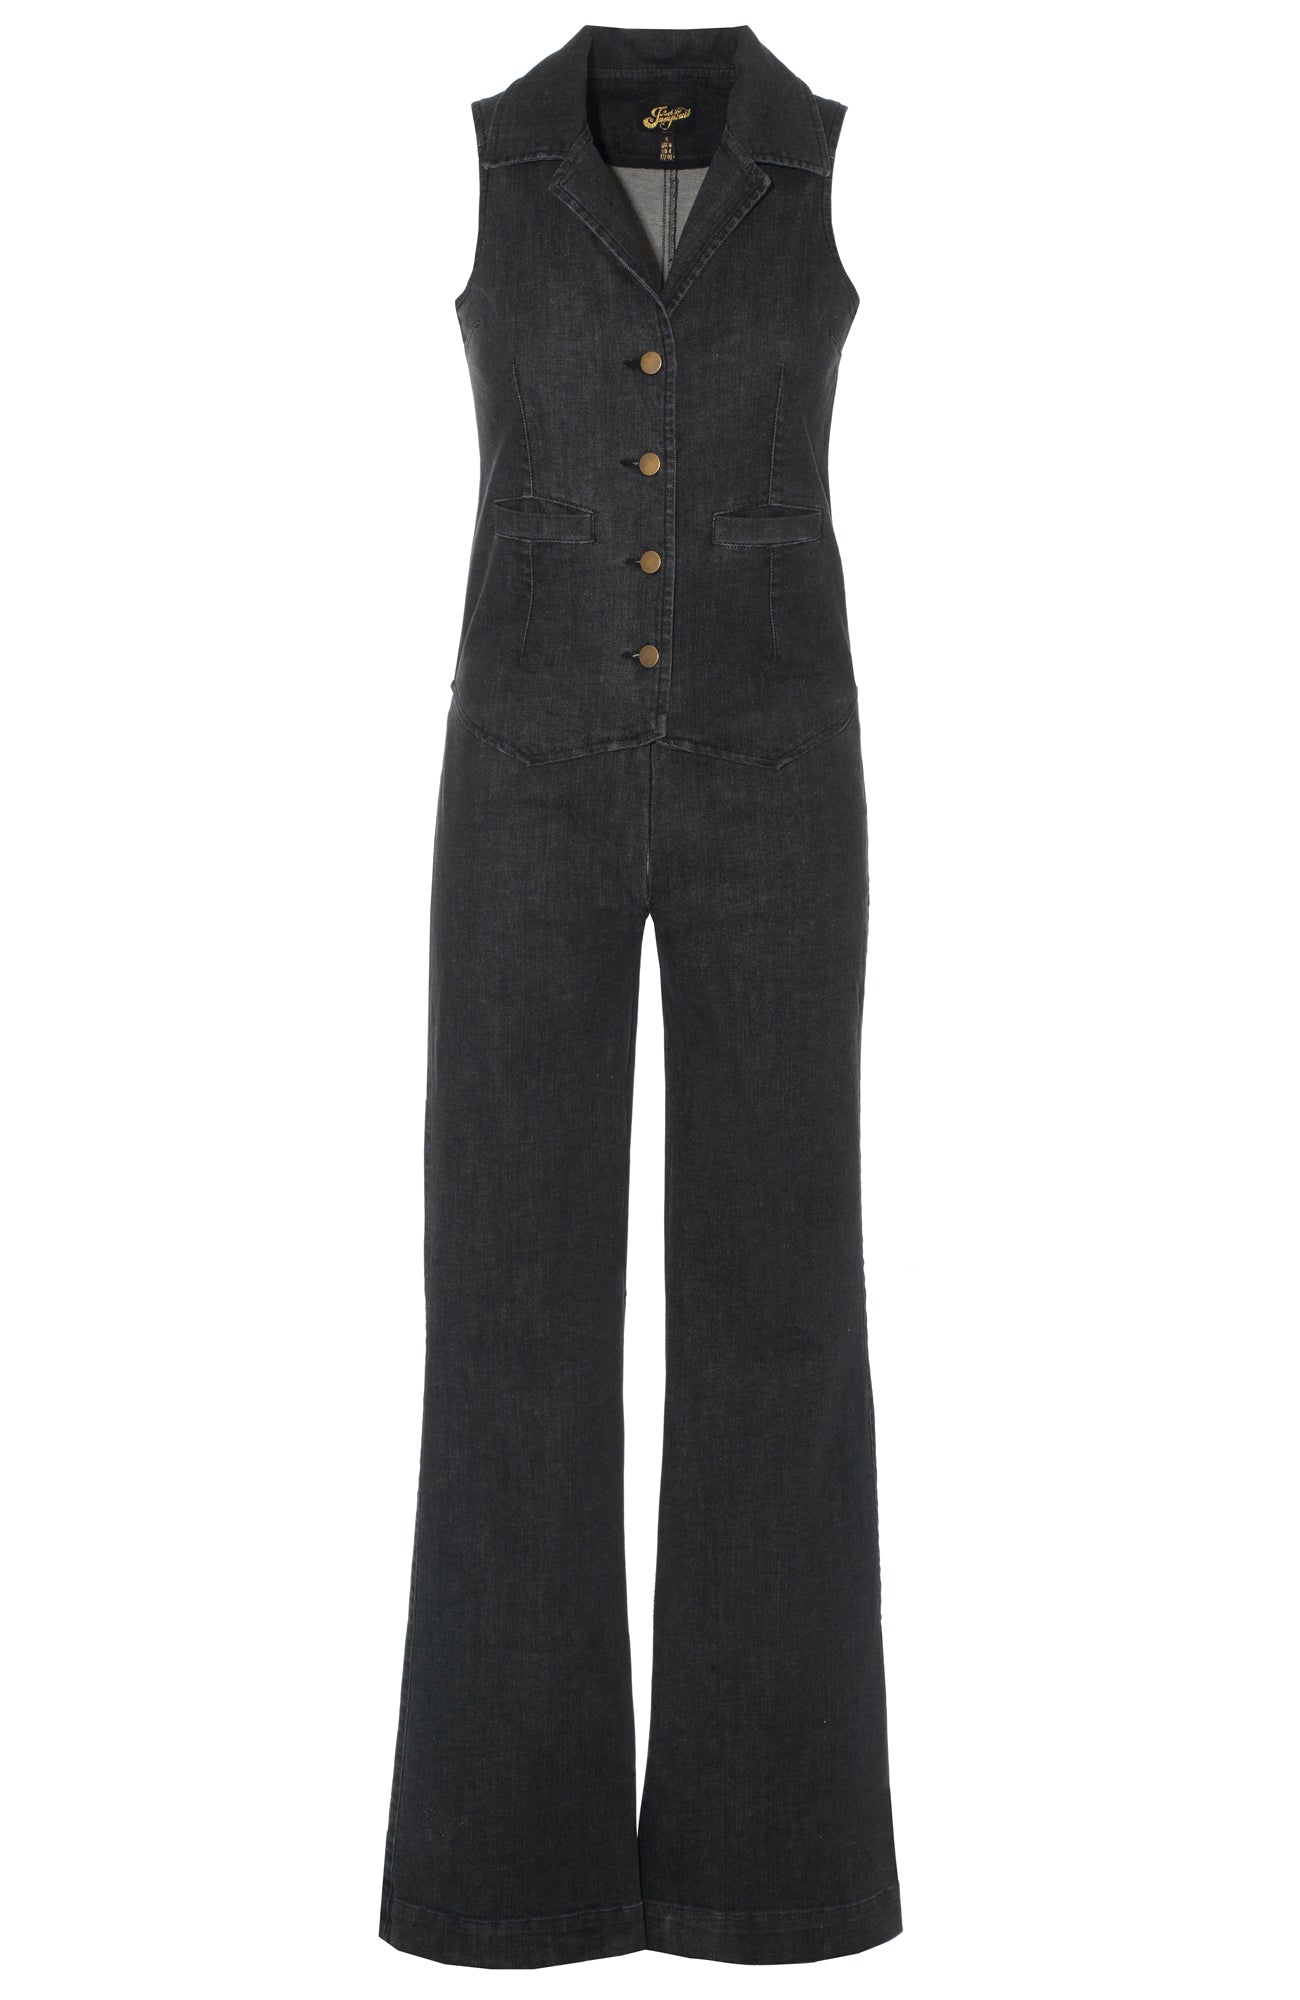 The *NEW* JESSIE in Washed Black Denim - Rock the Jumpsuit